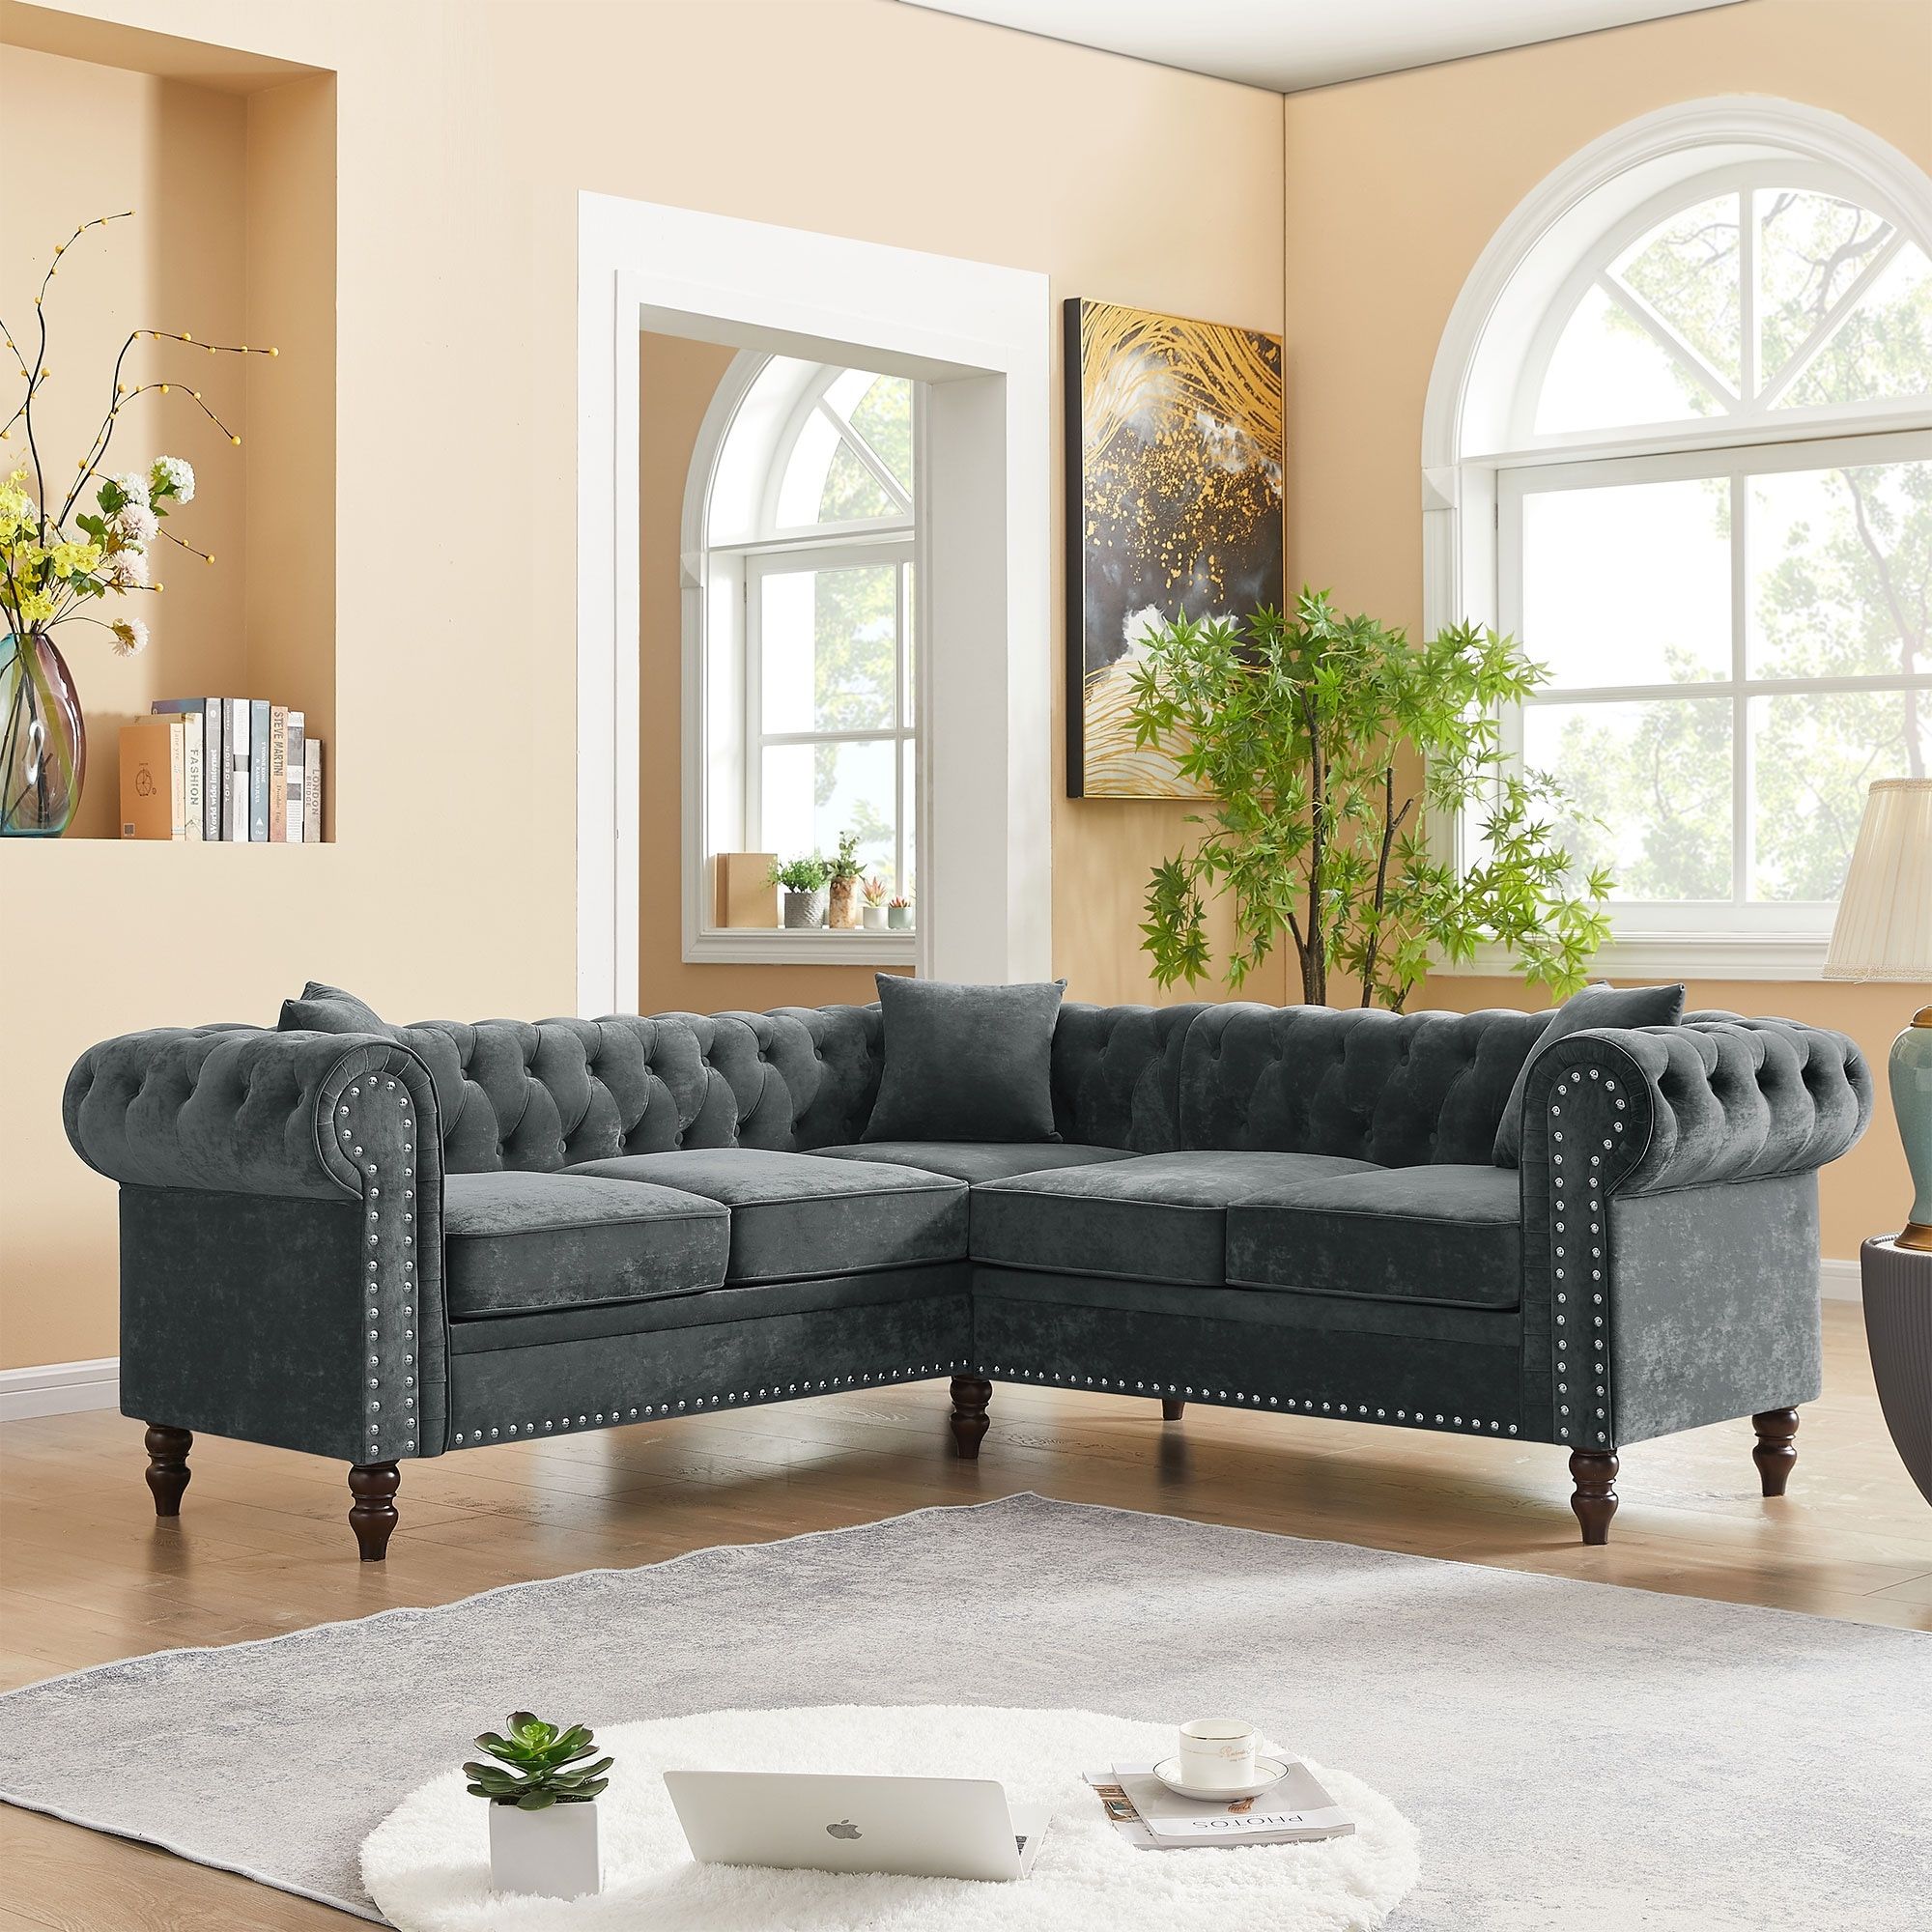 Sofa,l Shaped Sofaa,deep Button Tufted Upholstered, Roll Arm Luxury Classic  Sofa, 3 Pillows Included – Bed Bath & Beyond – 38283618 With Regard To Tufted Upholstered Sofas (View 6 of 15)